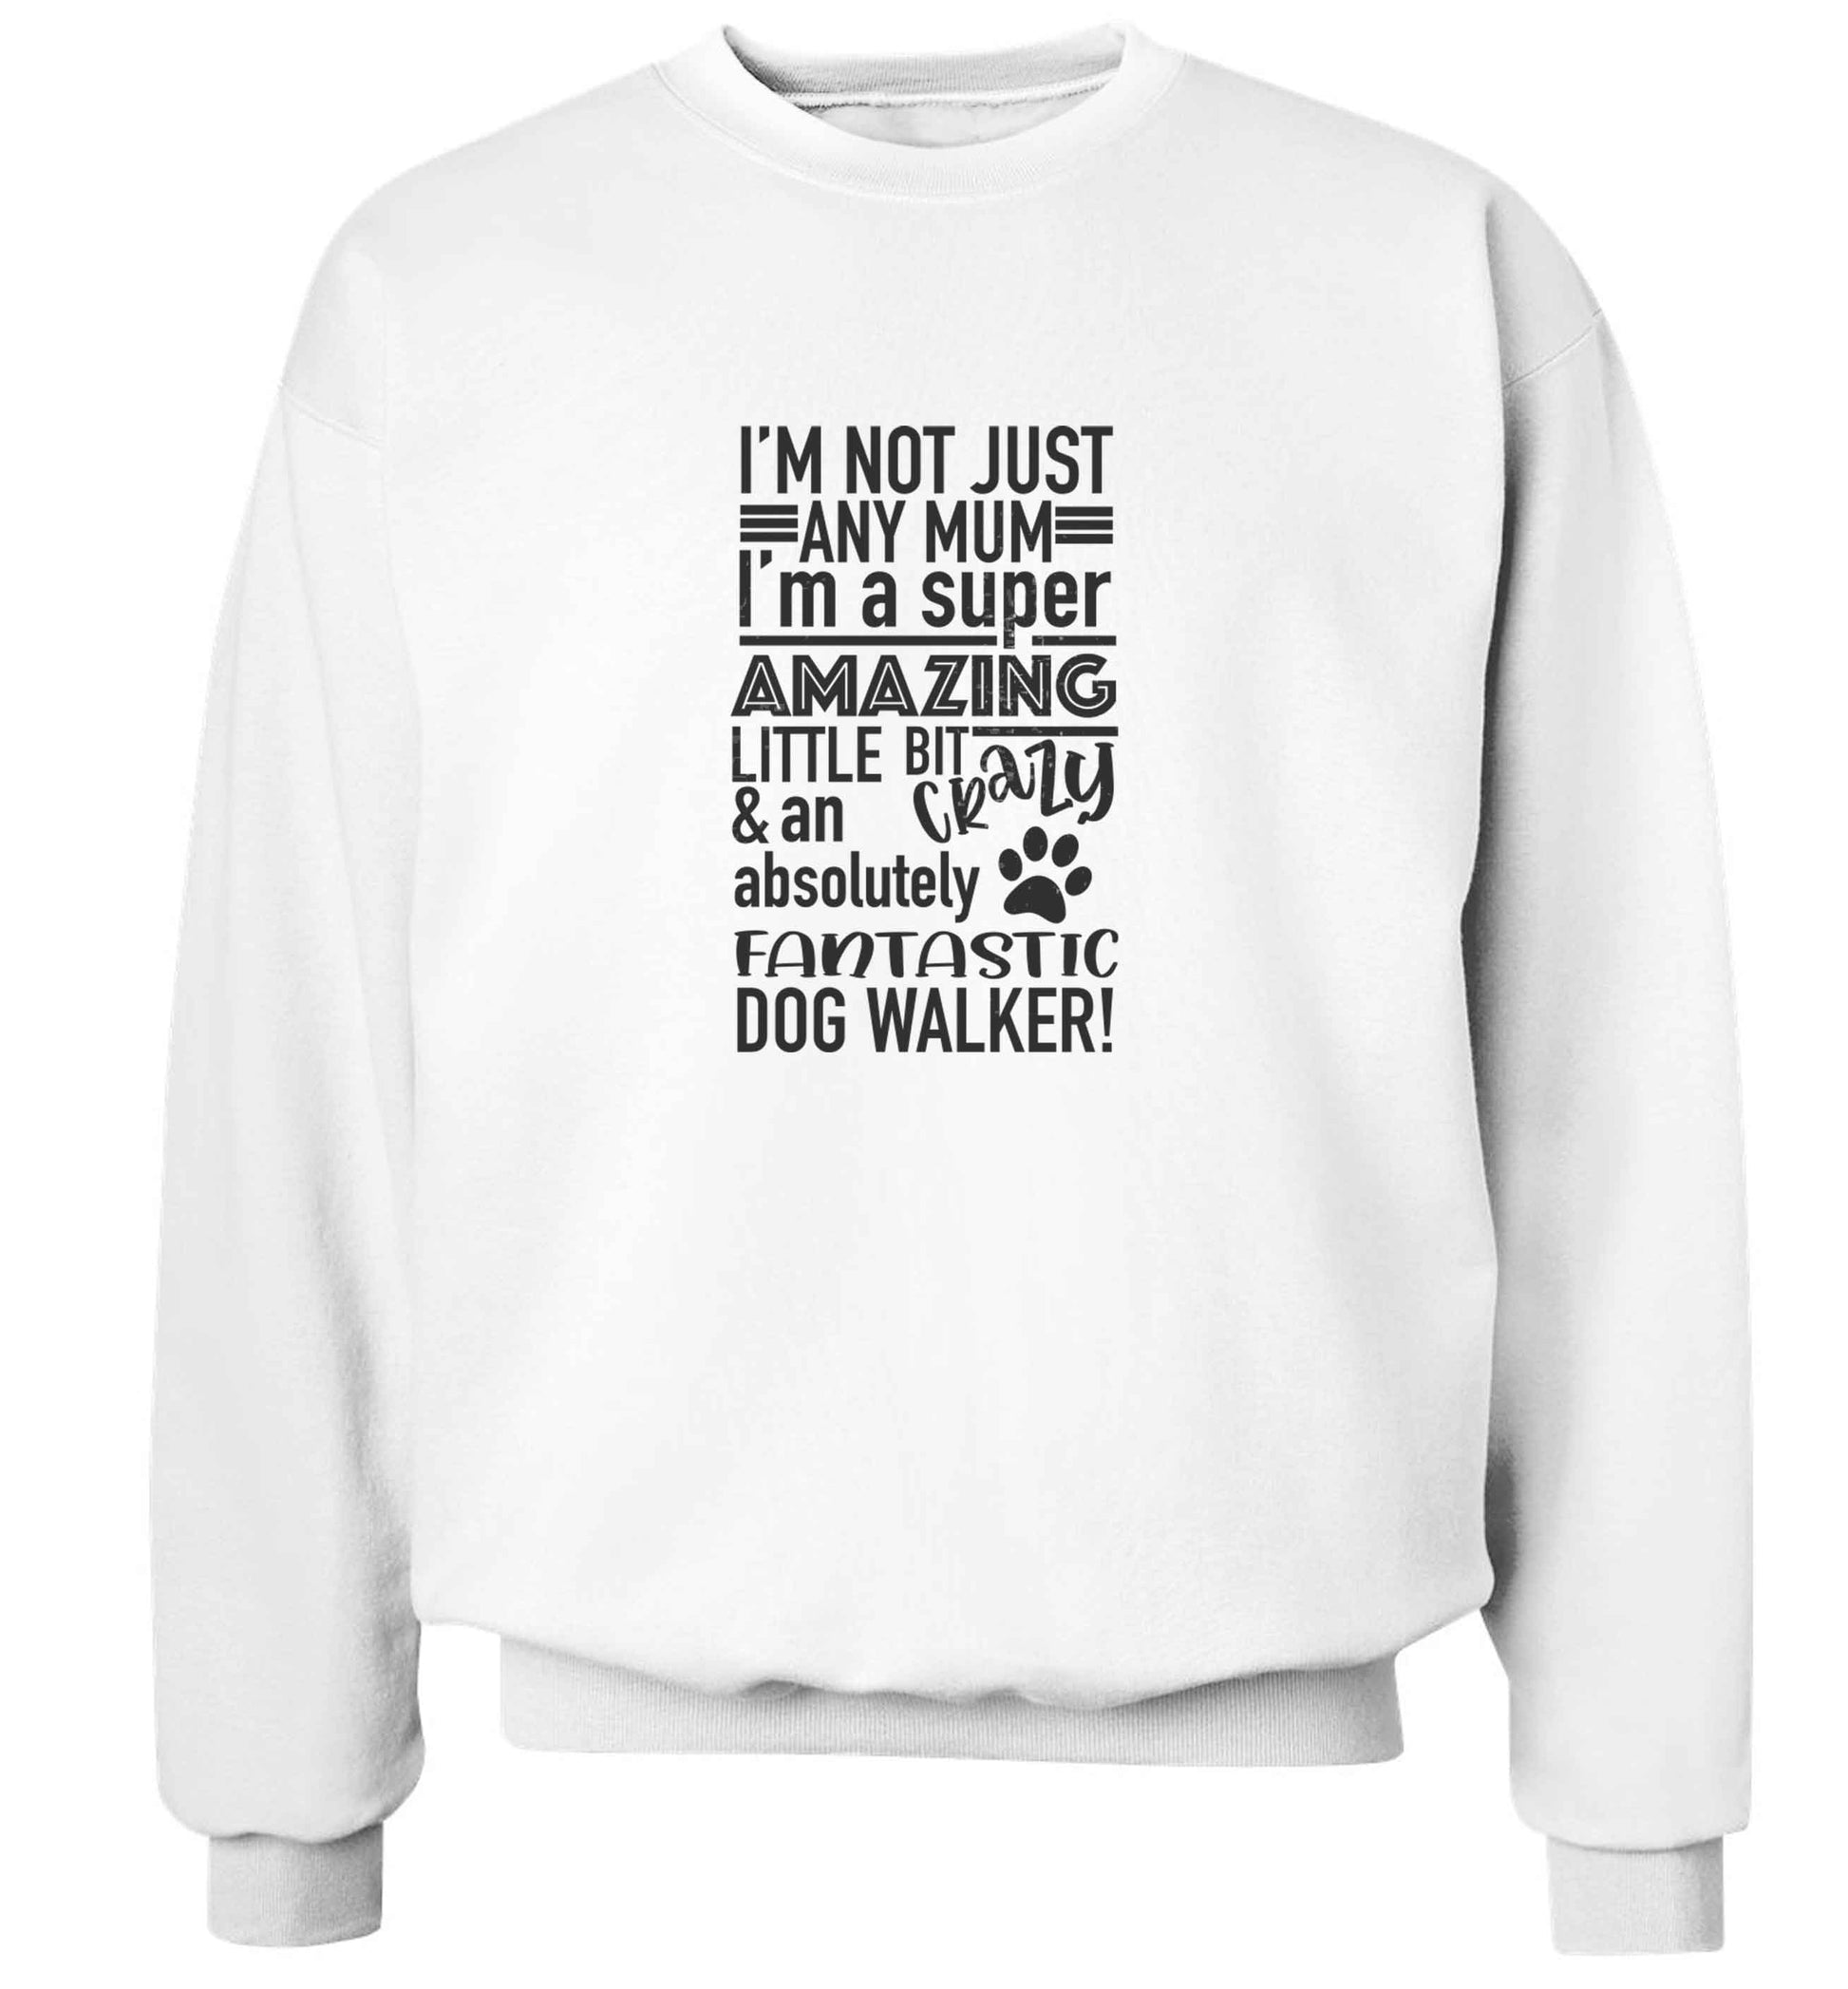 I'm not just any mum I'm a super amazing little bit crazy and an absolutely fantastic dog walker! adult's unisex white sweater 2XL